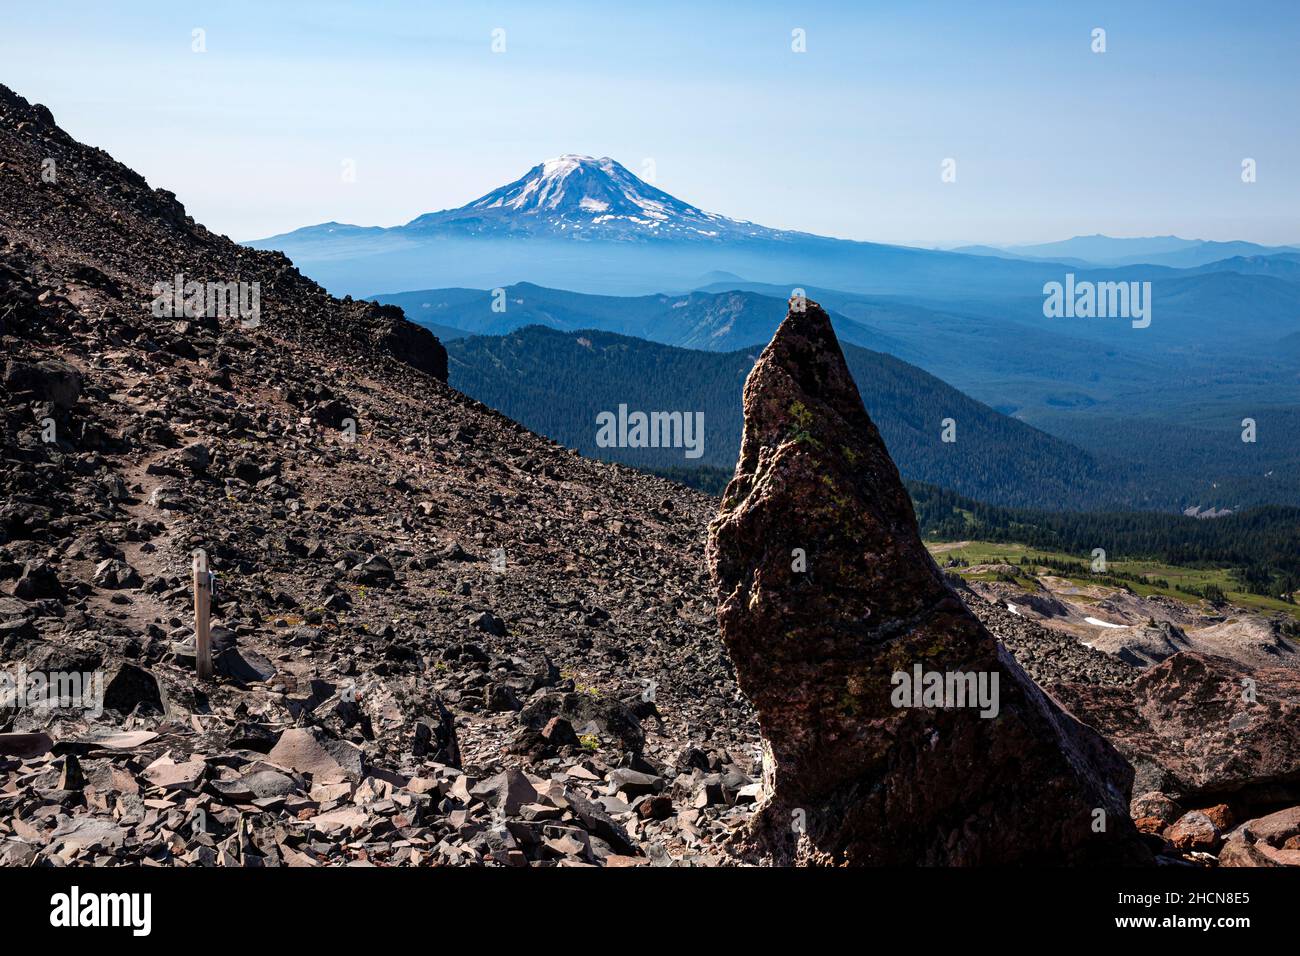 WA19947-00...WASHINGTON - Rock spire marking the intersection with the PCT Alternate and Old Snowy Trails in the Goat Rocks Wilderness area. Stock Photo